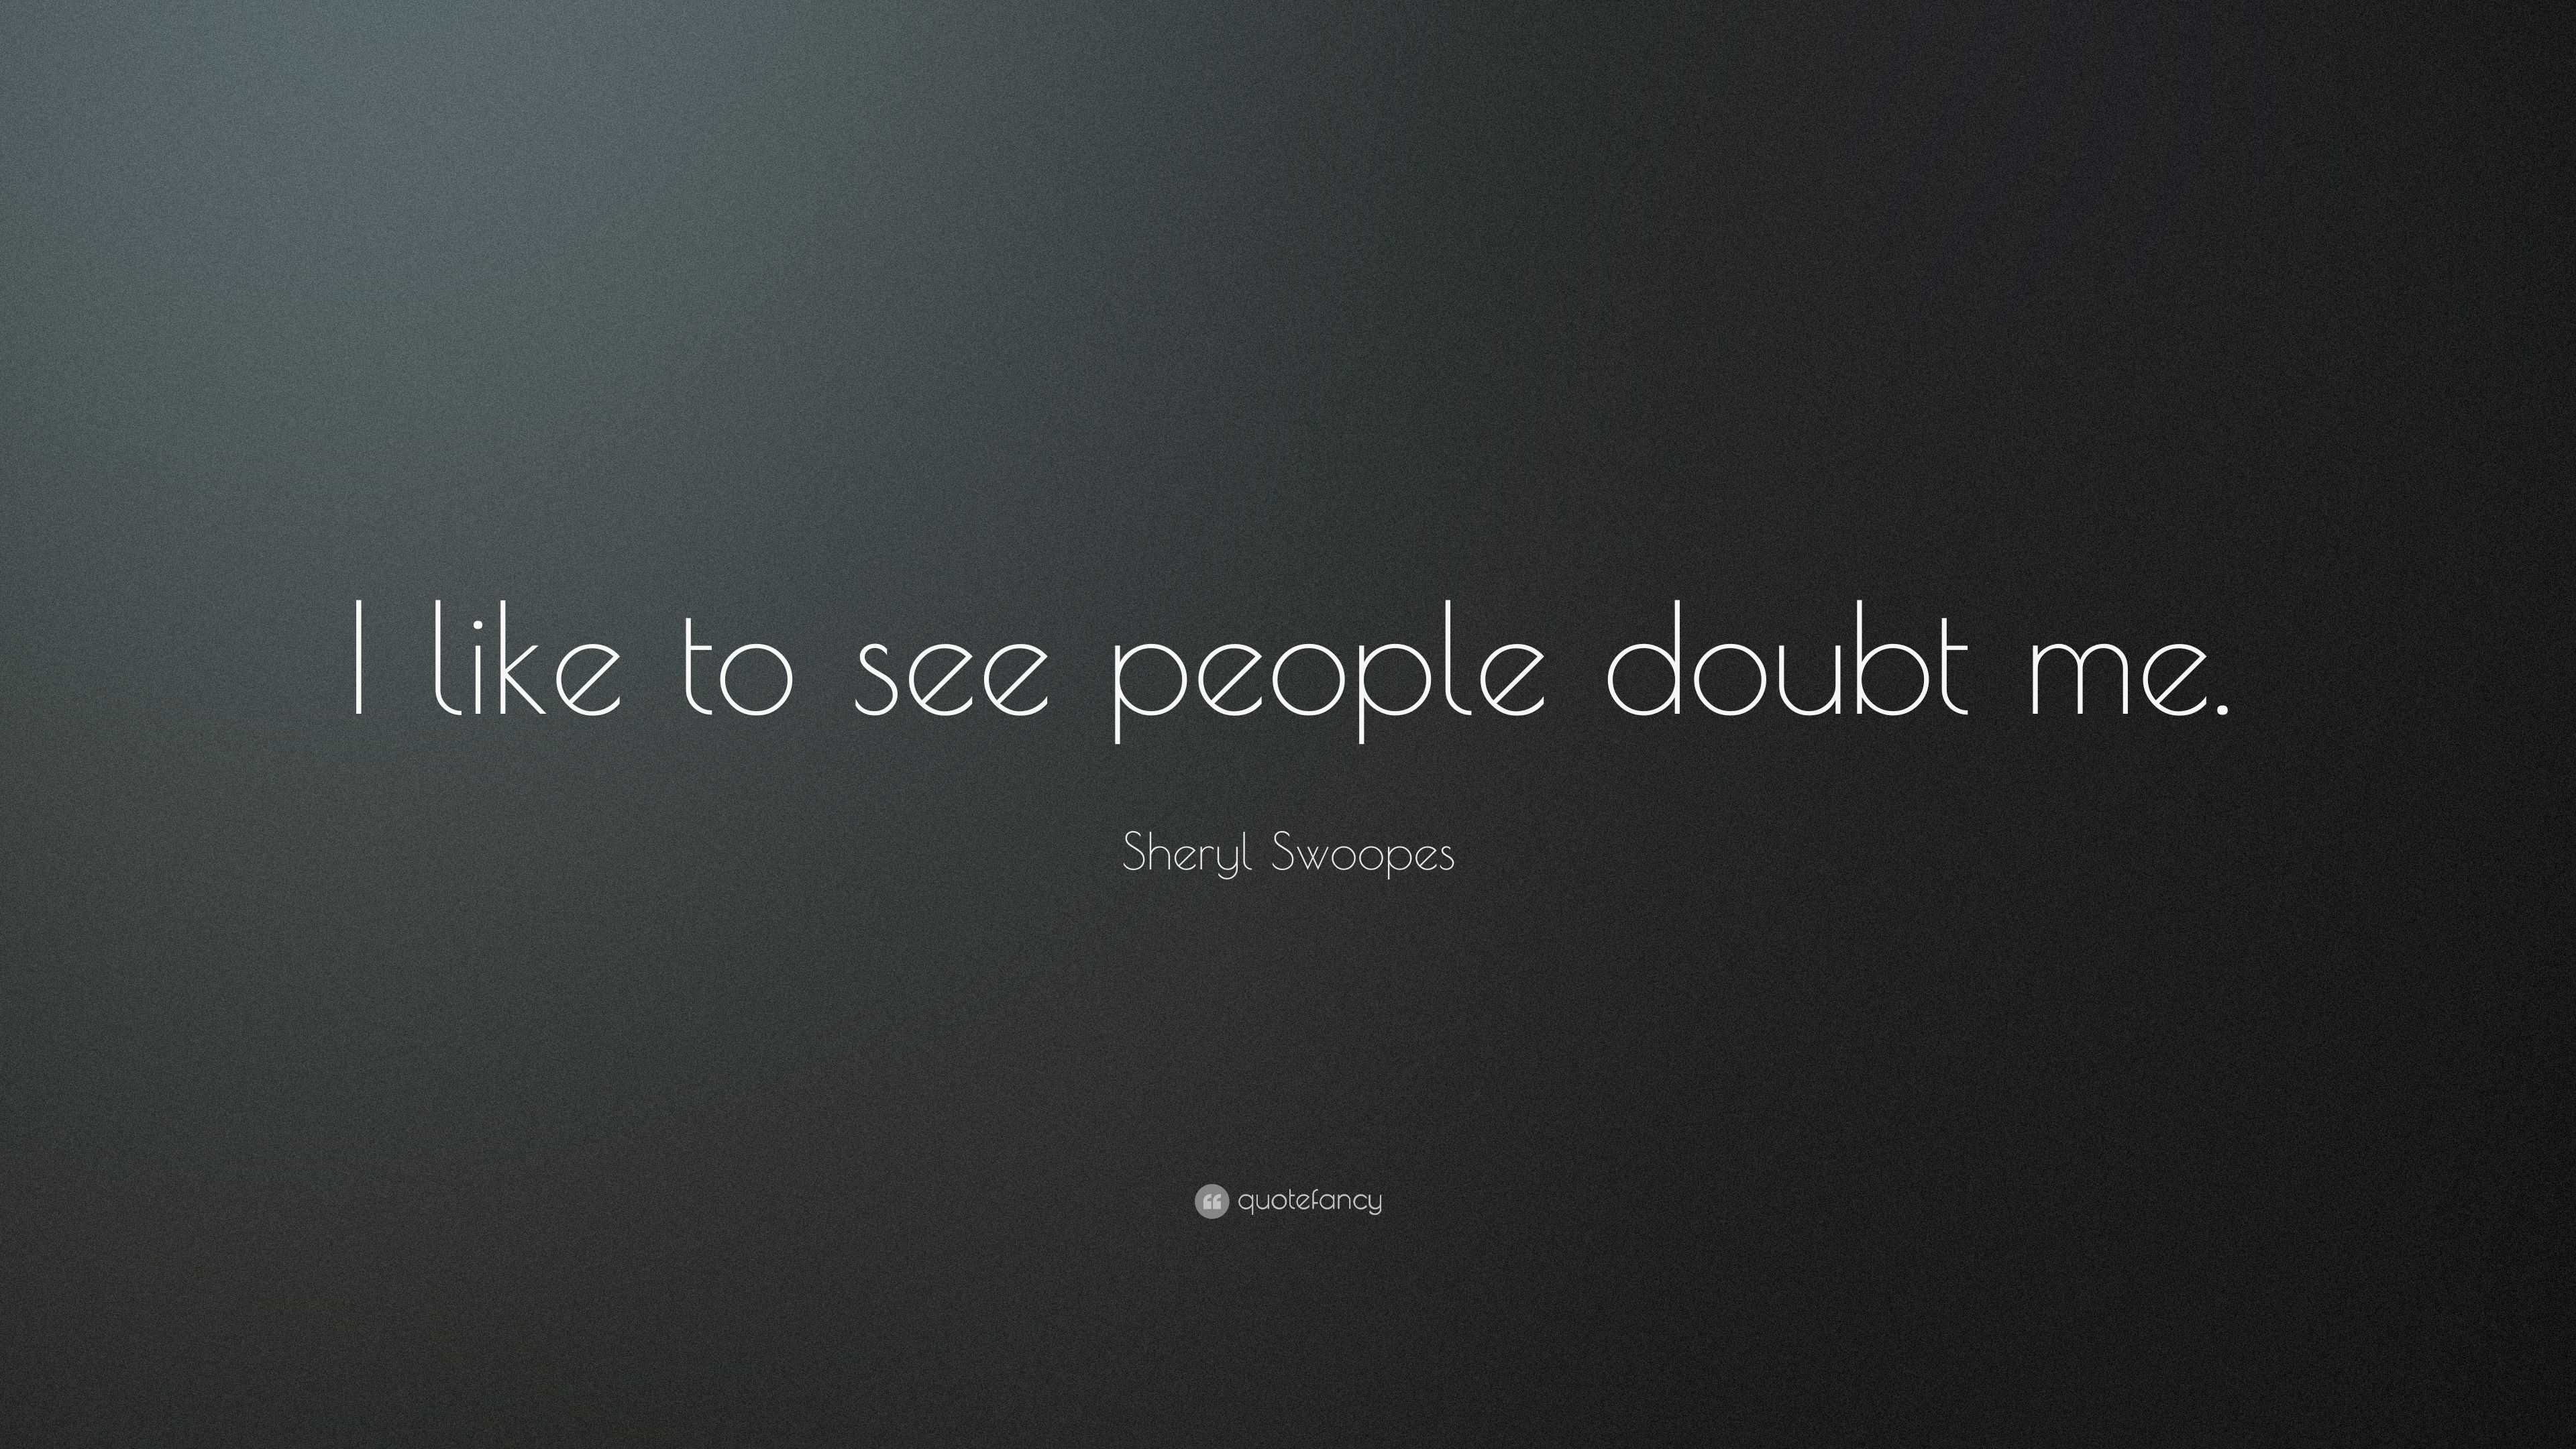 Sheryl Swoopes Quote: “I like to see people doubt me.”